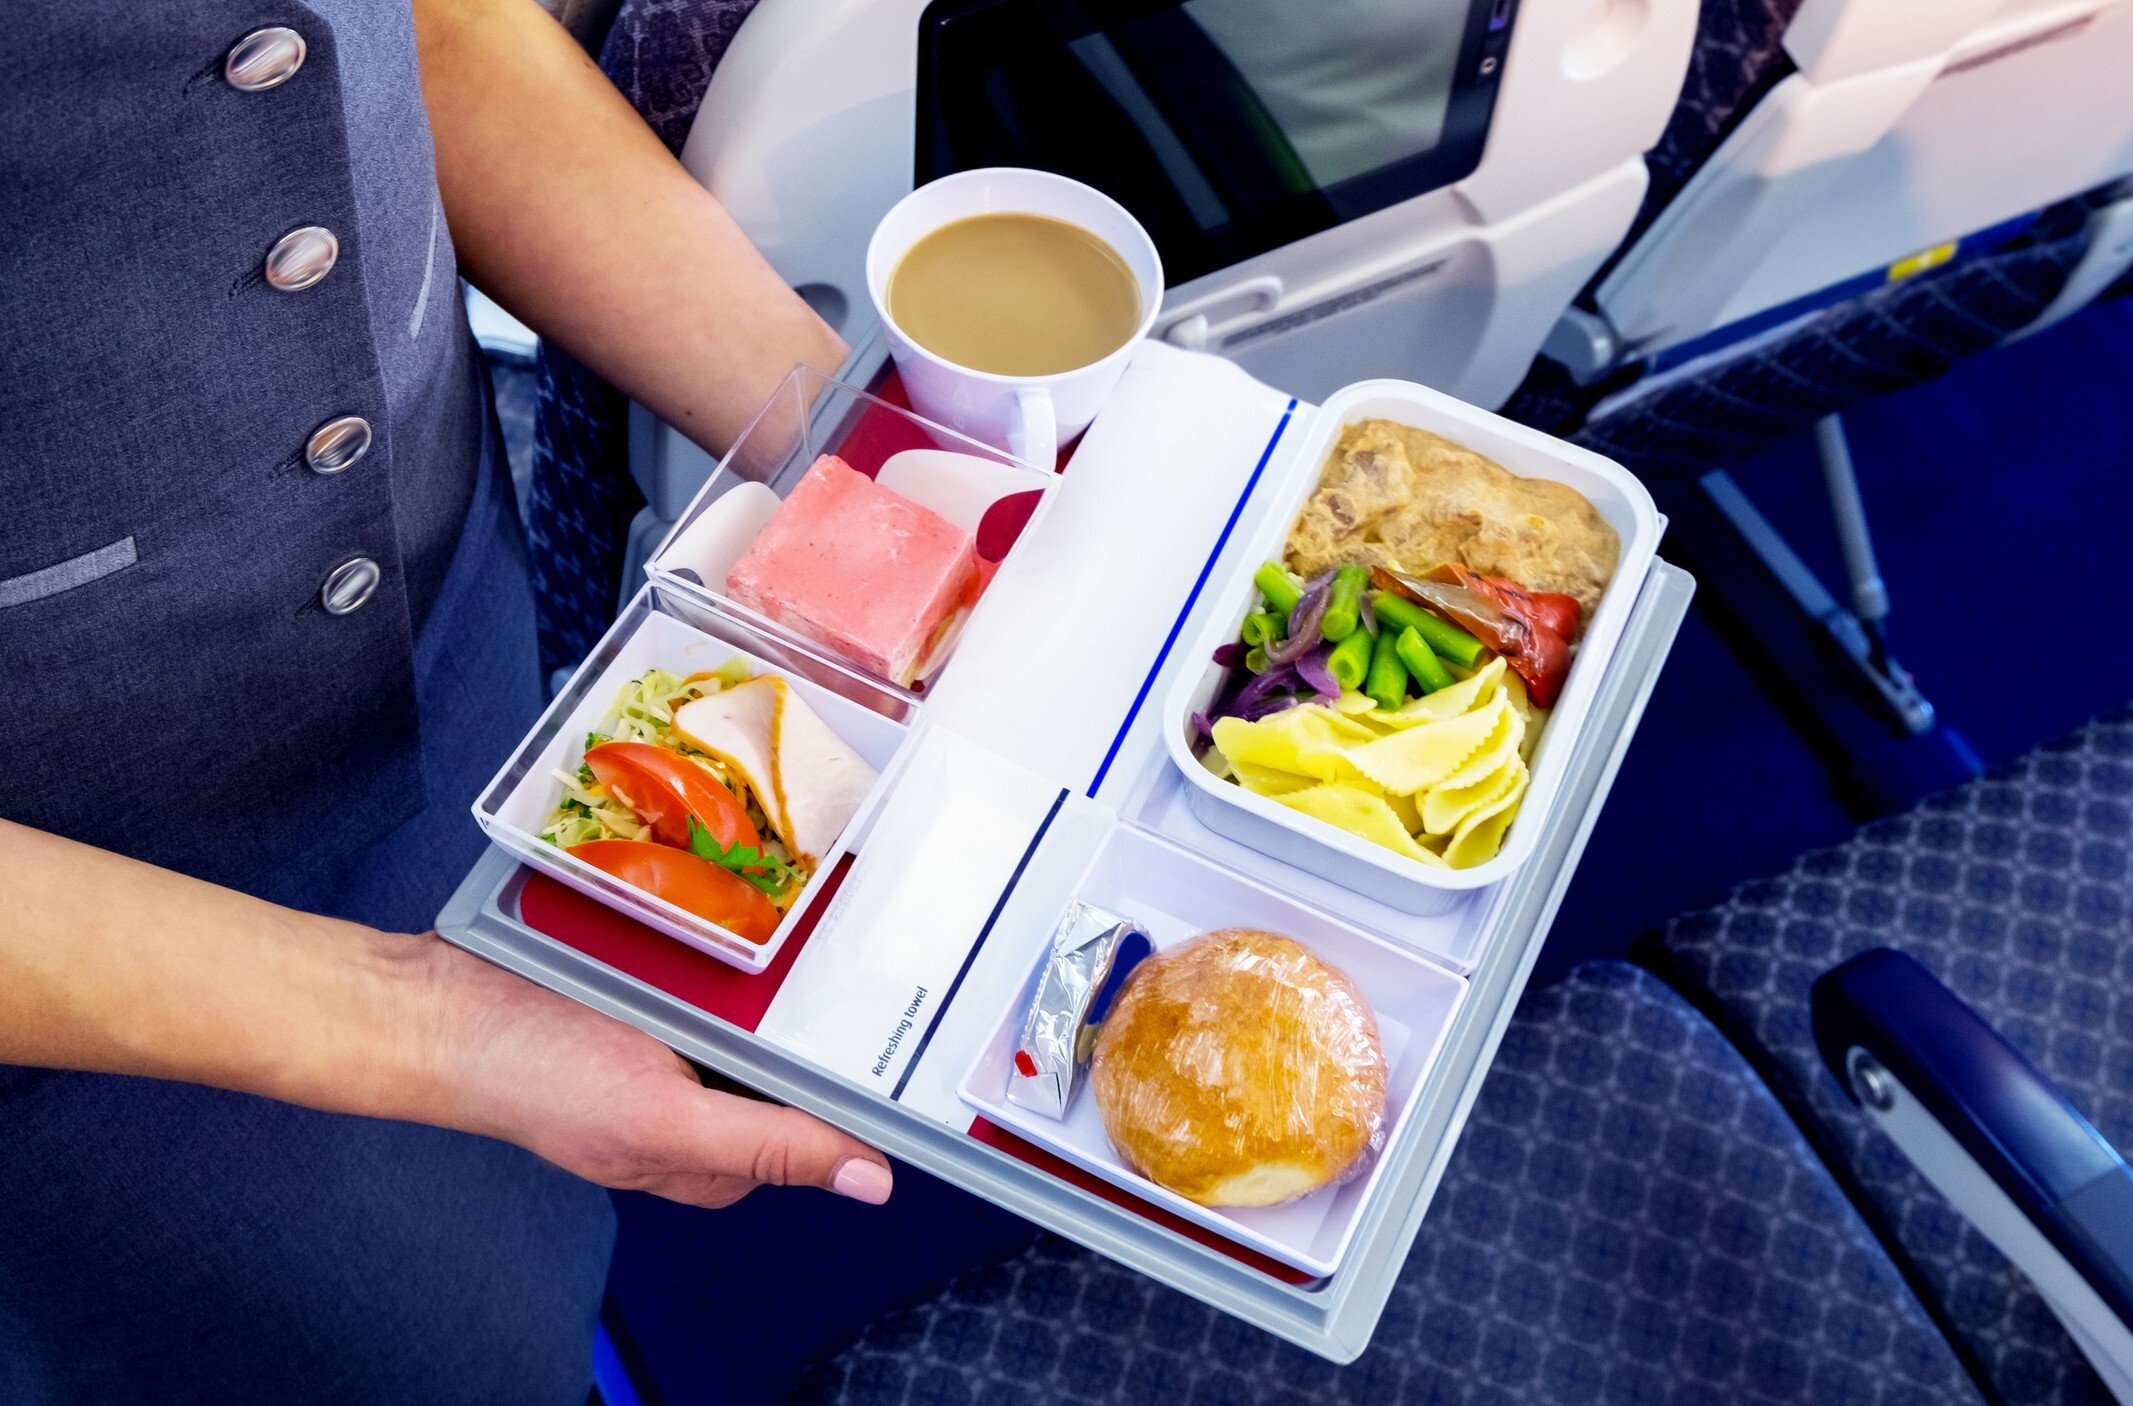 Airline meals often end up as waste. Photo: Getty Images/iStockphoto